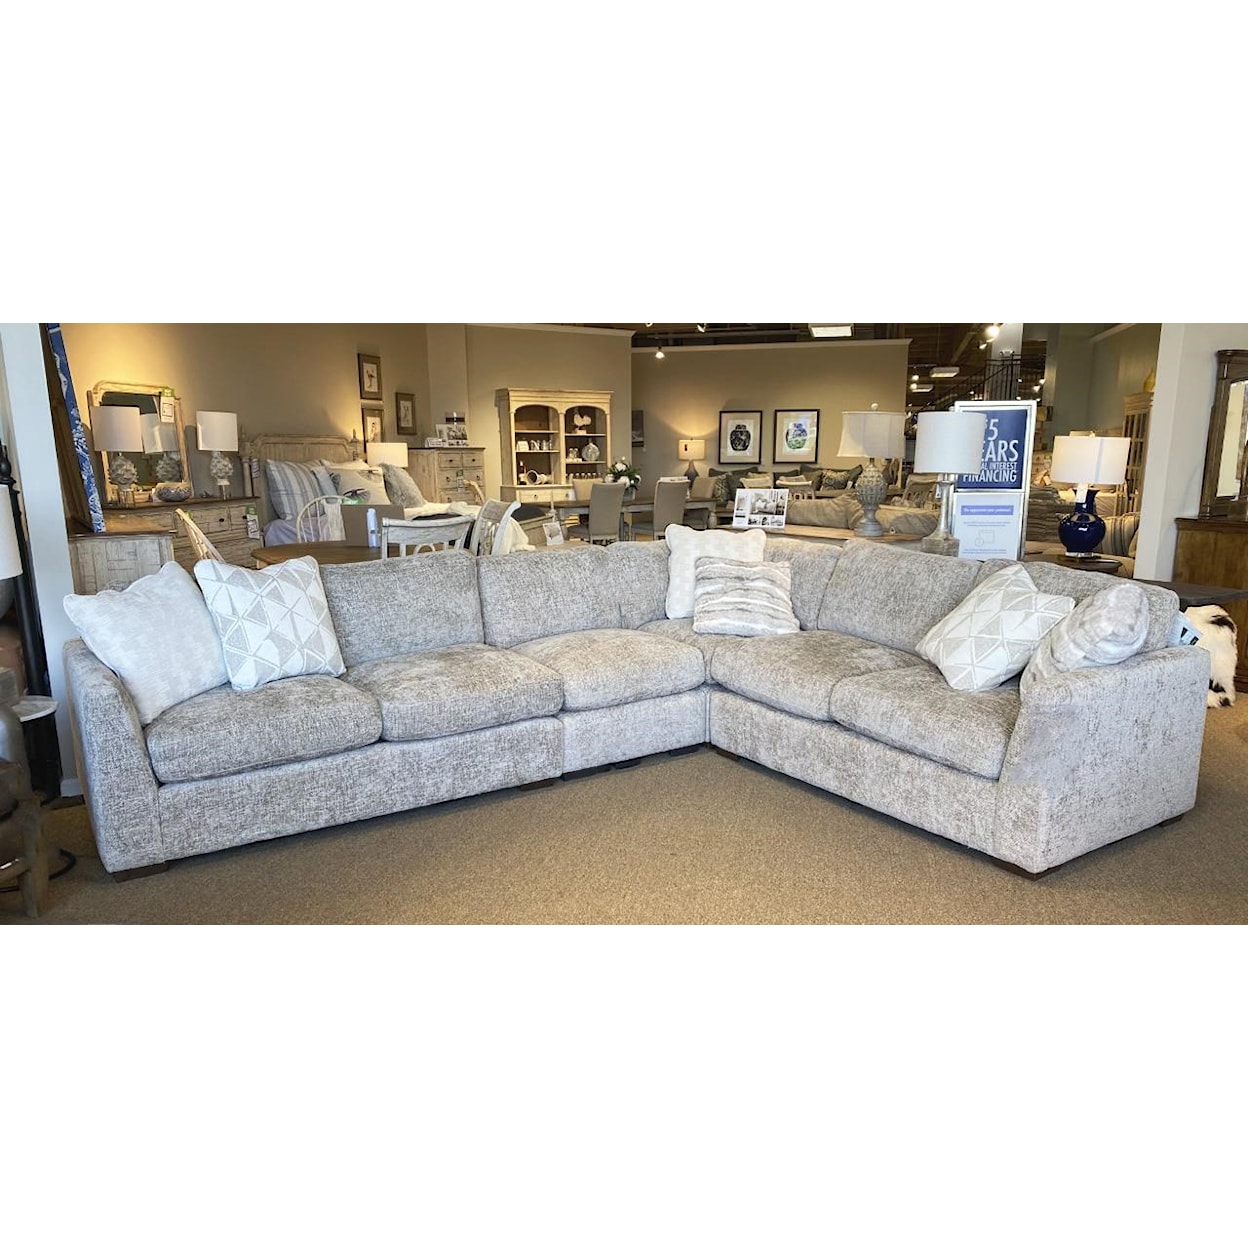 Hickorycraft BUNGALOW CRAFTMASTER 3 PC SECTIONAL